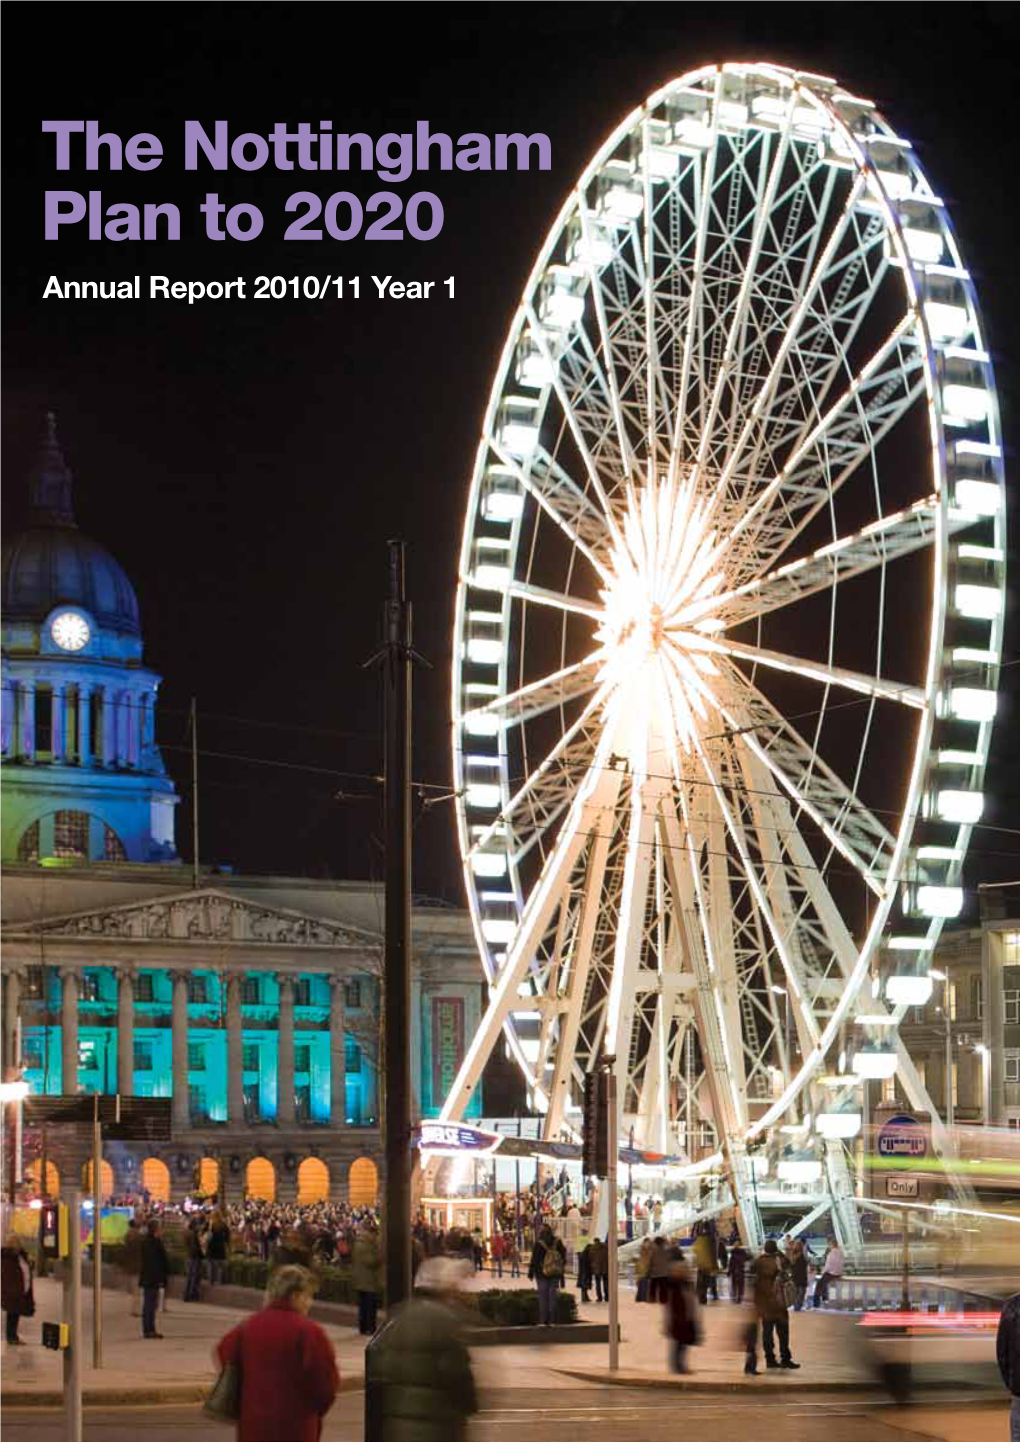 The Nottingham Plan to 2020 Annual Report 2010/11 Year 1 Contents